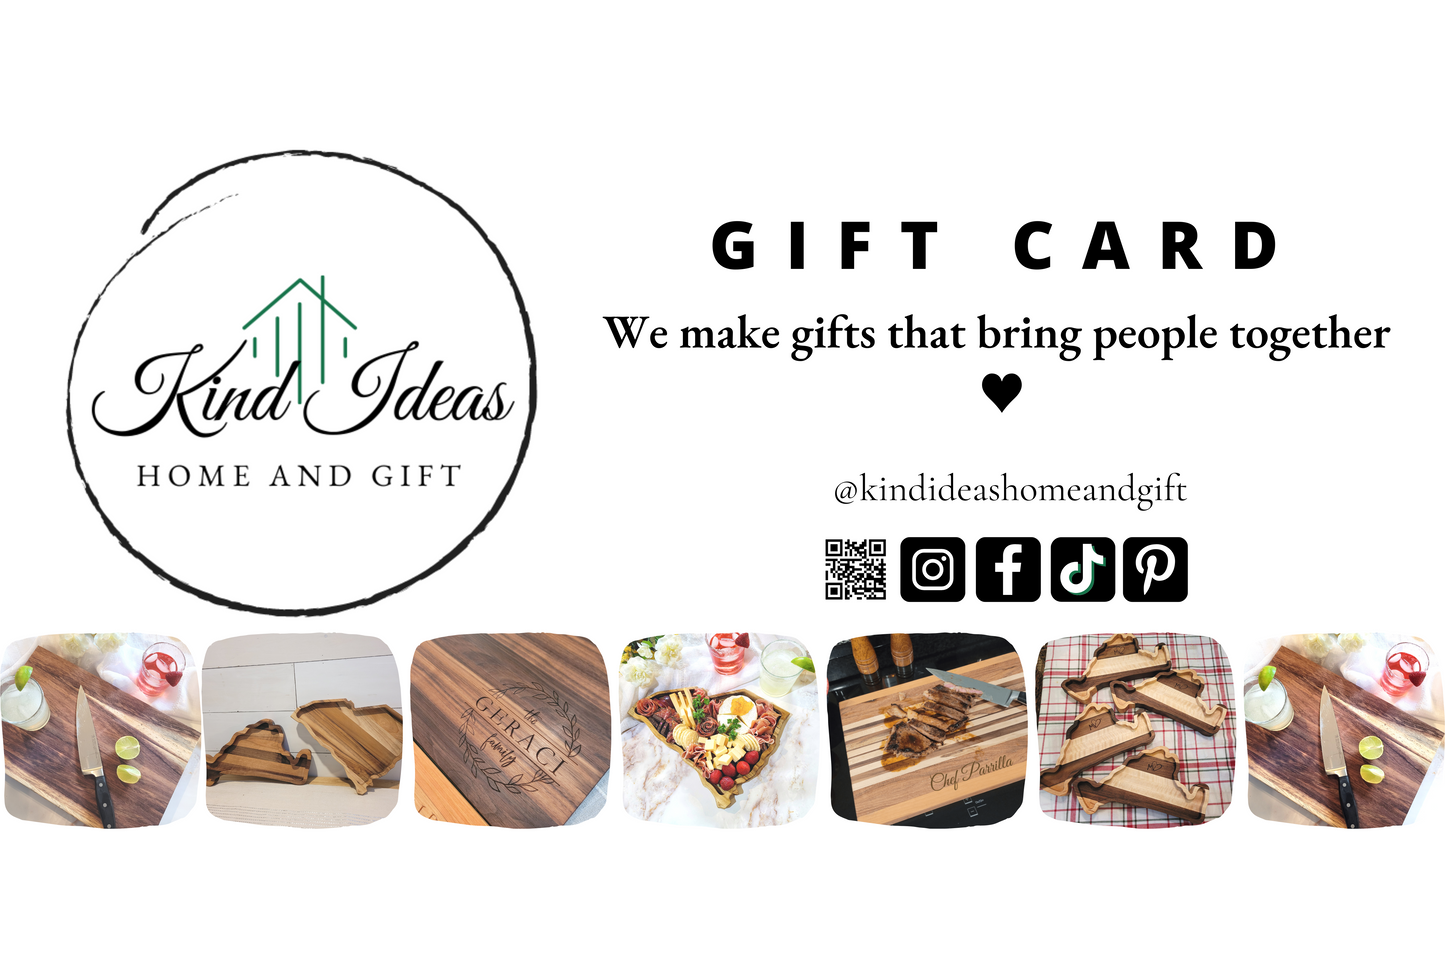 The perfect gift for your choosiest friends and loved ones - gift card